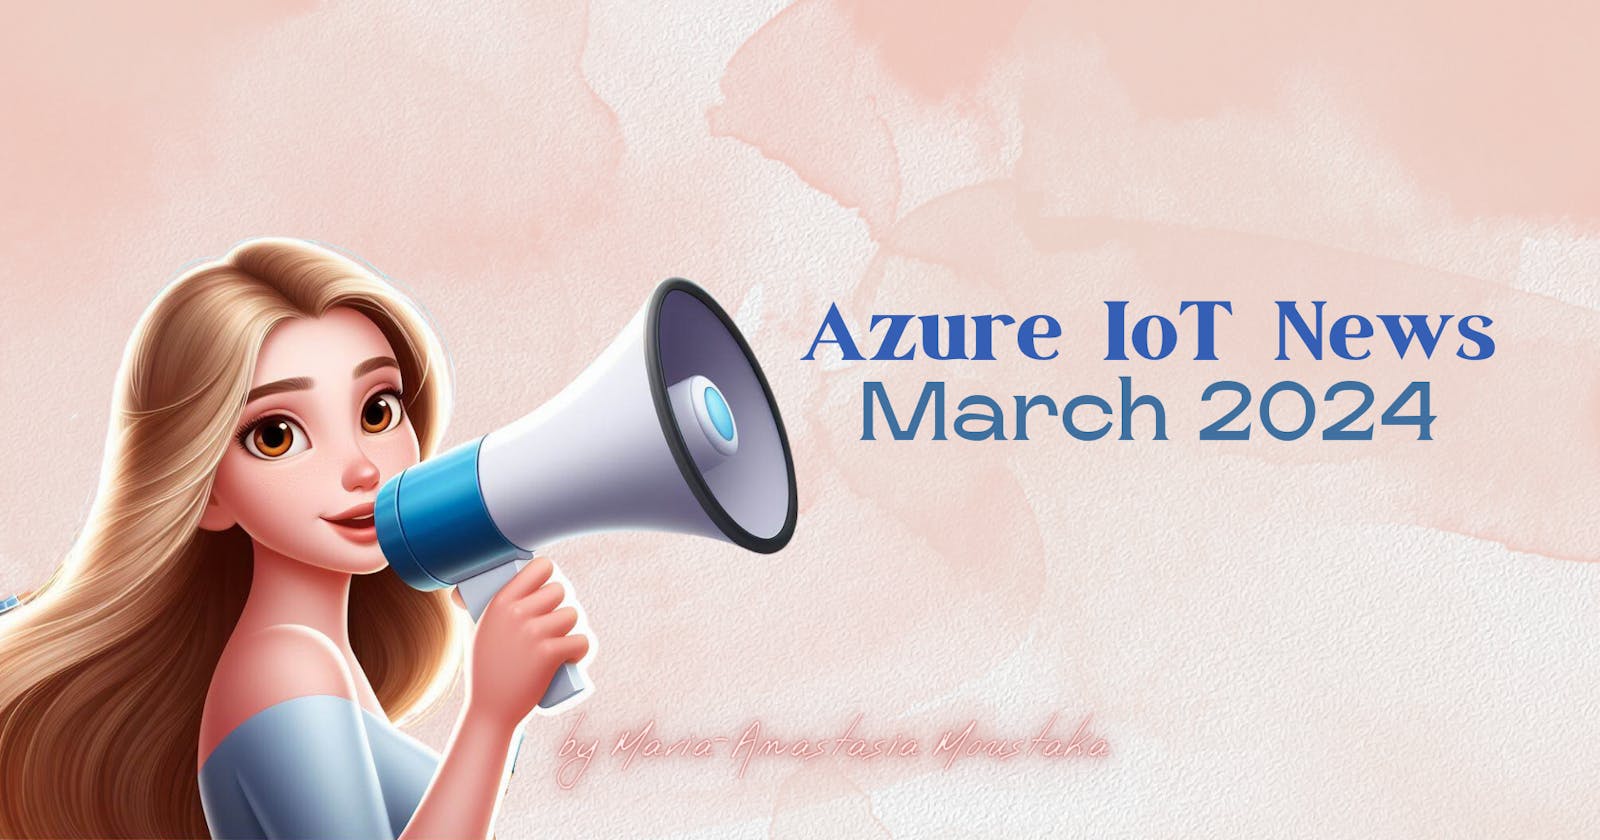 Azure IoT News – March 2024 by Think About IoT